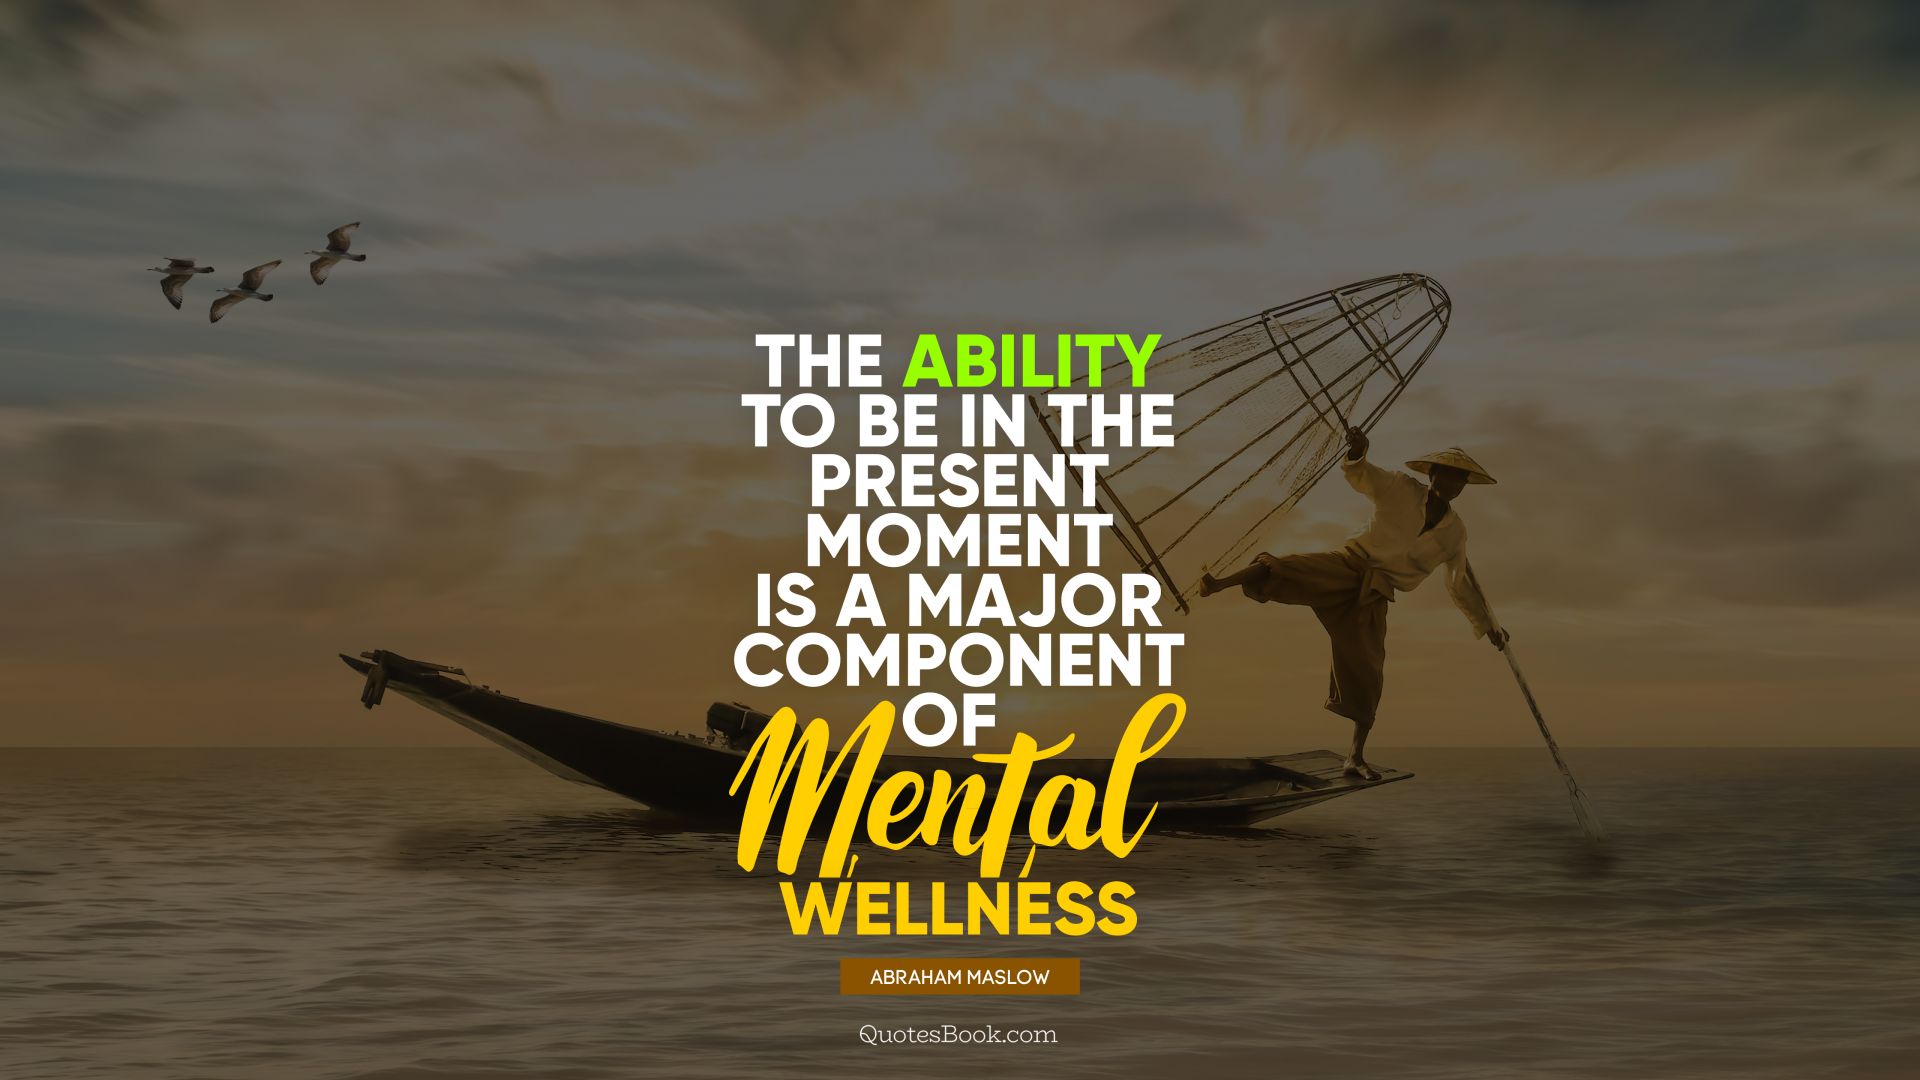 The ability to be in the present moment is a major component of mental wellness. - Quote by Abraham Maslow